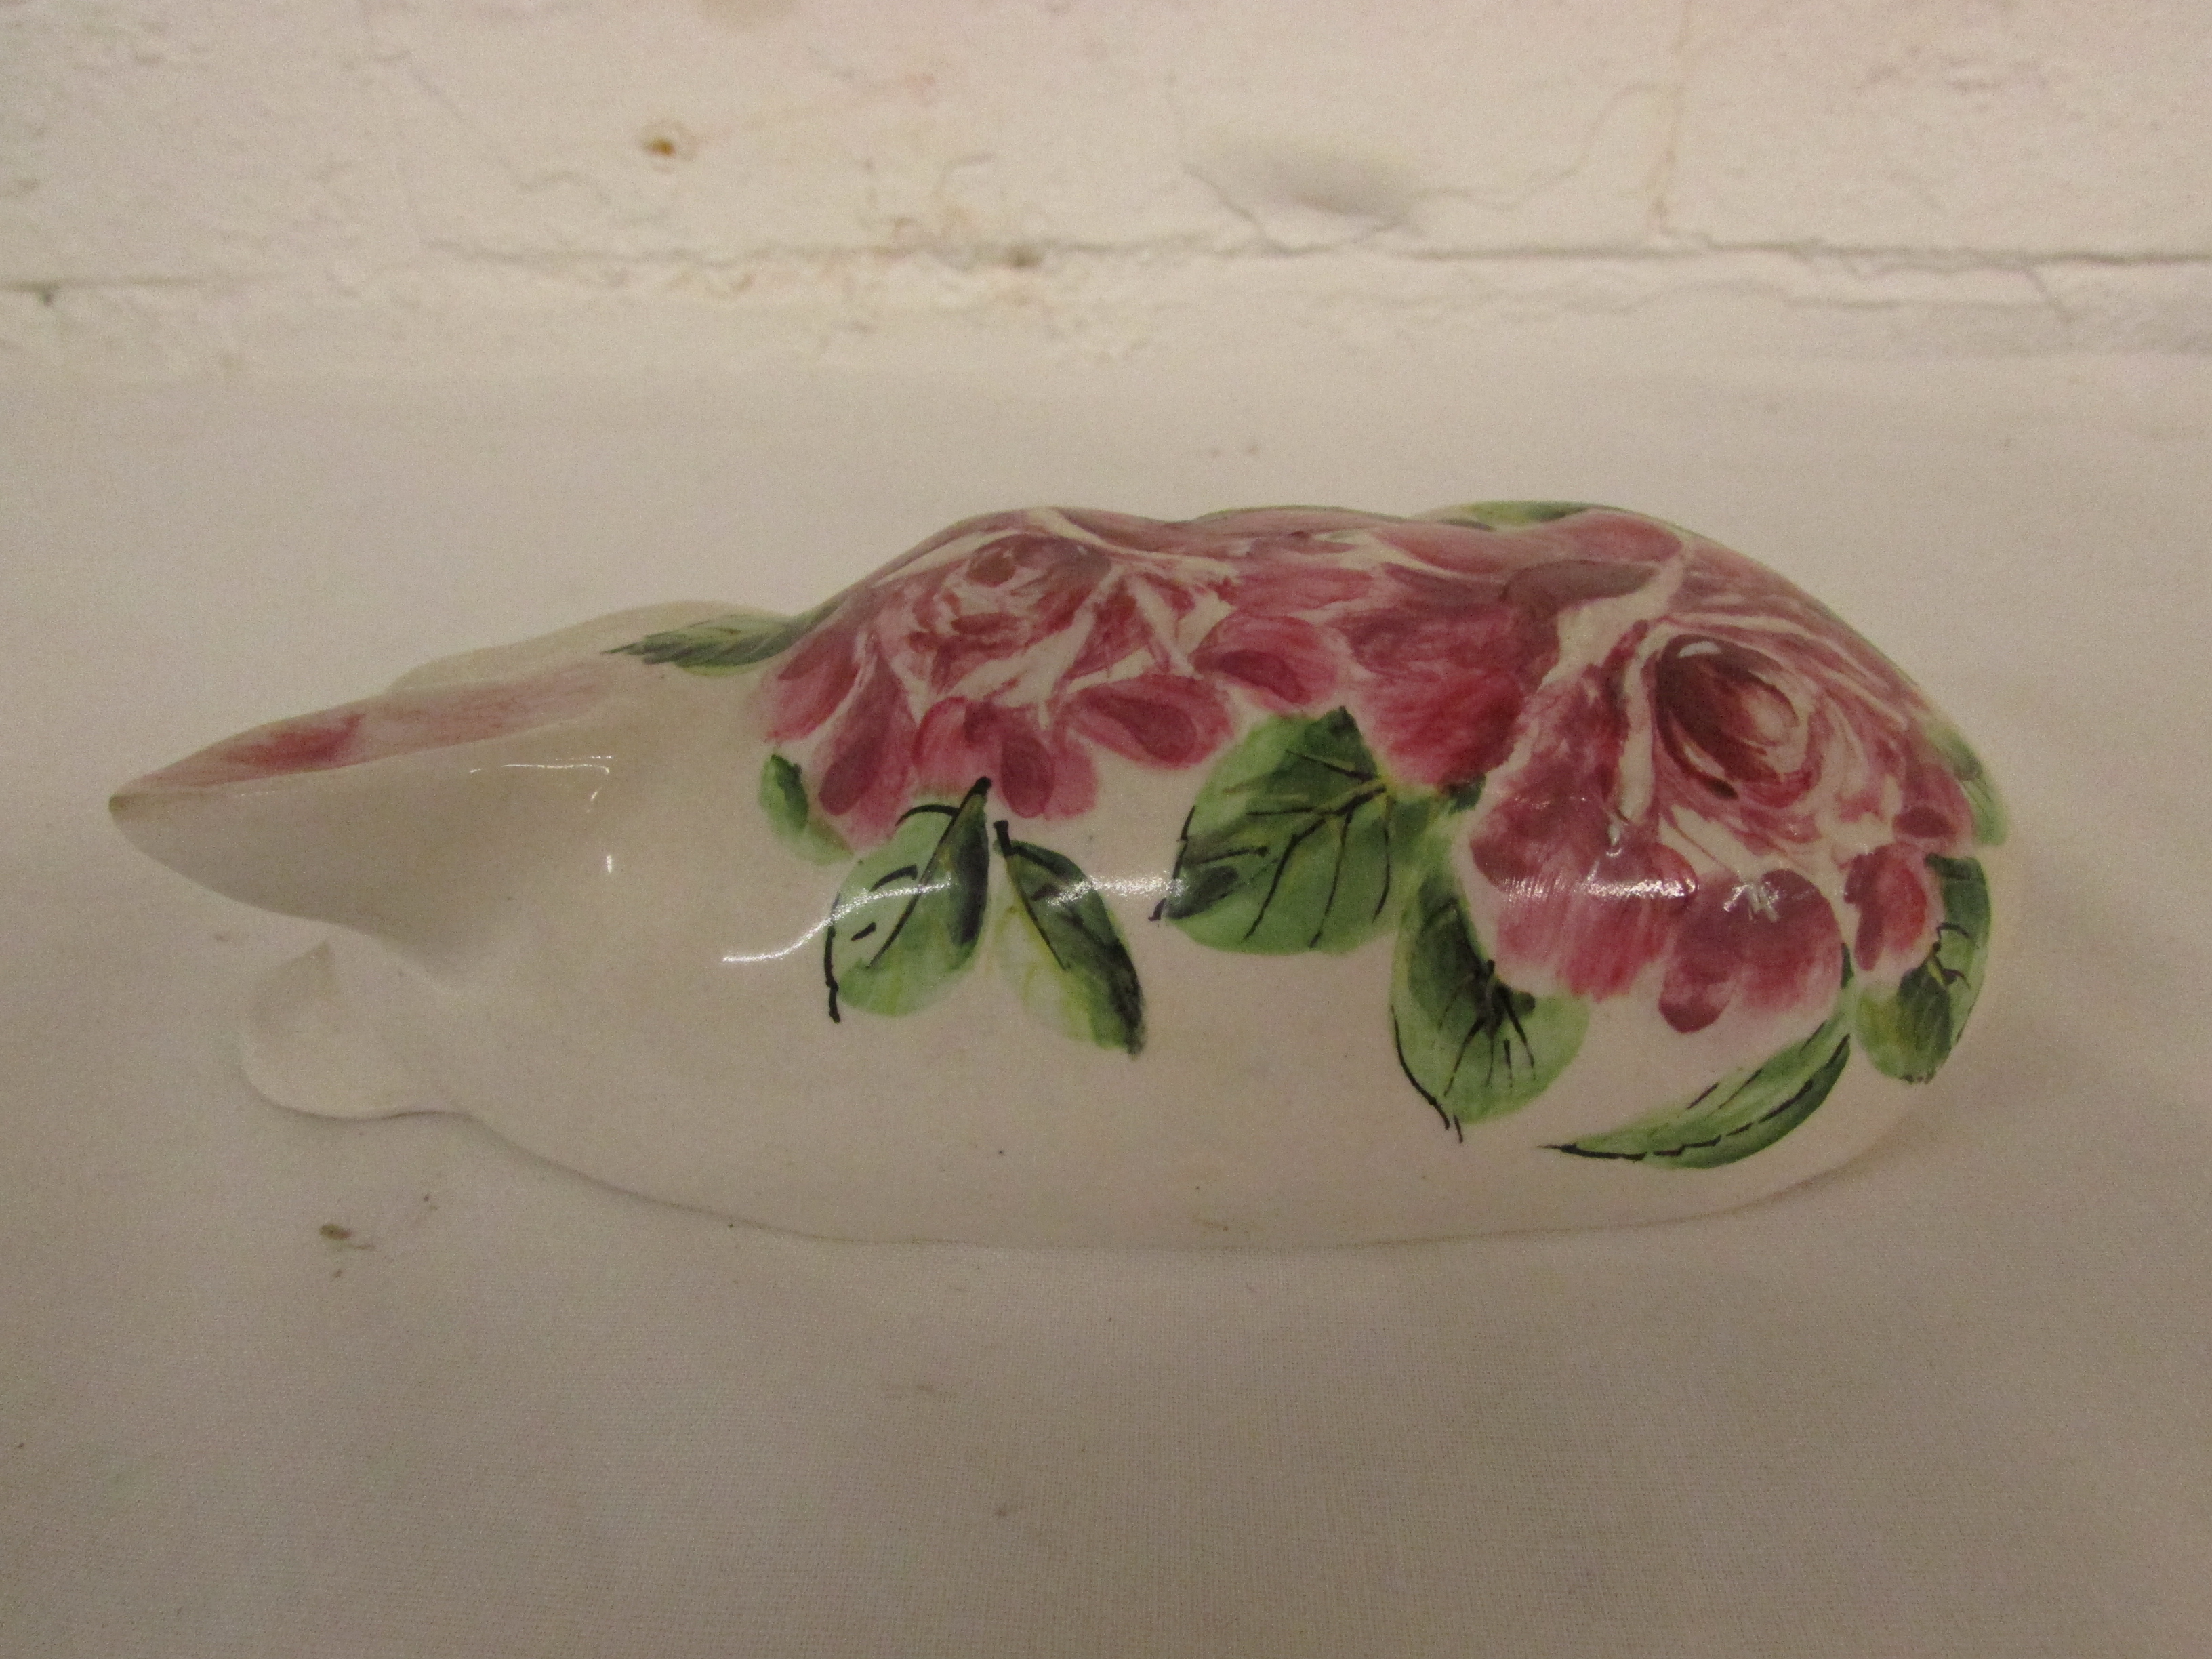 Exon Pottery Wemyss Ware Brian Adams figure of a sleeping pig, painted with pink roses and green - Image 2 of 3